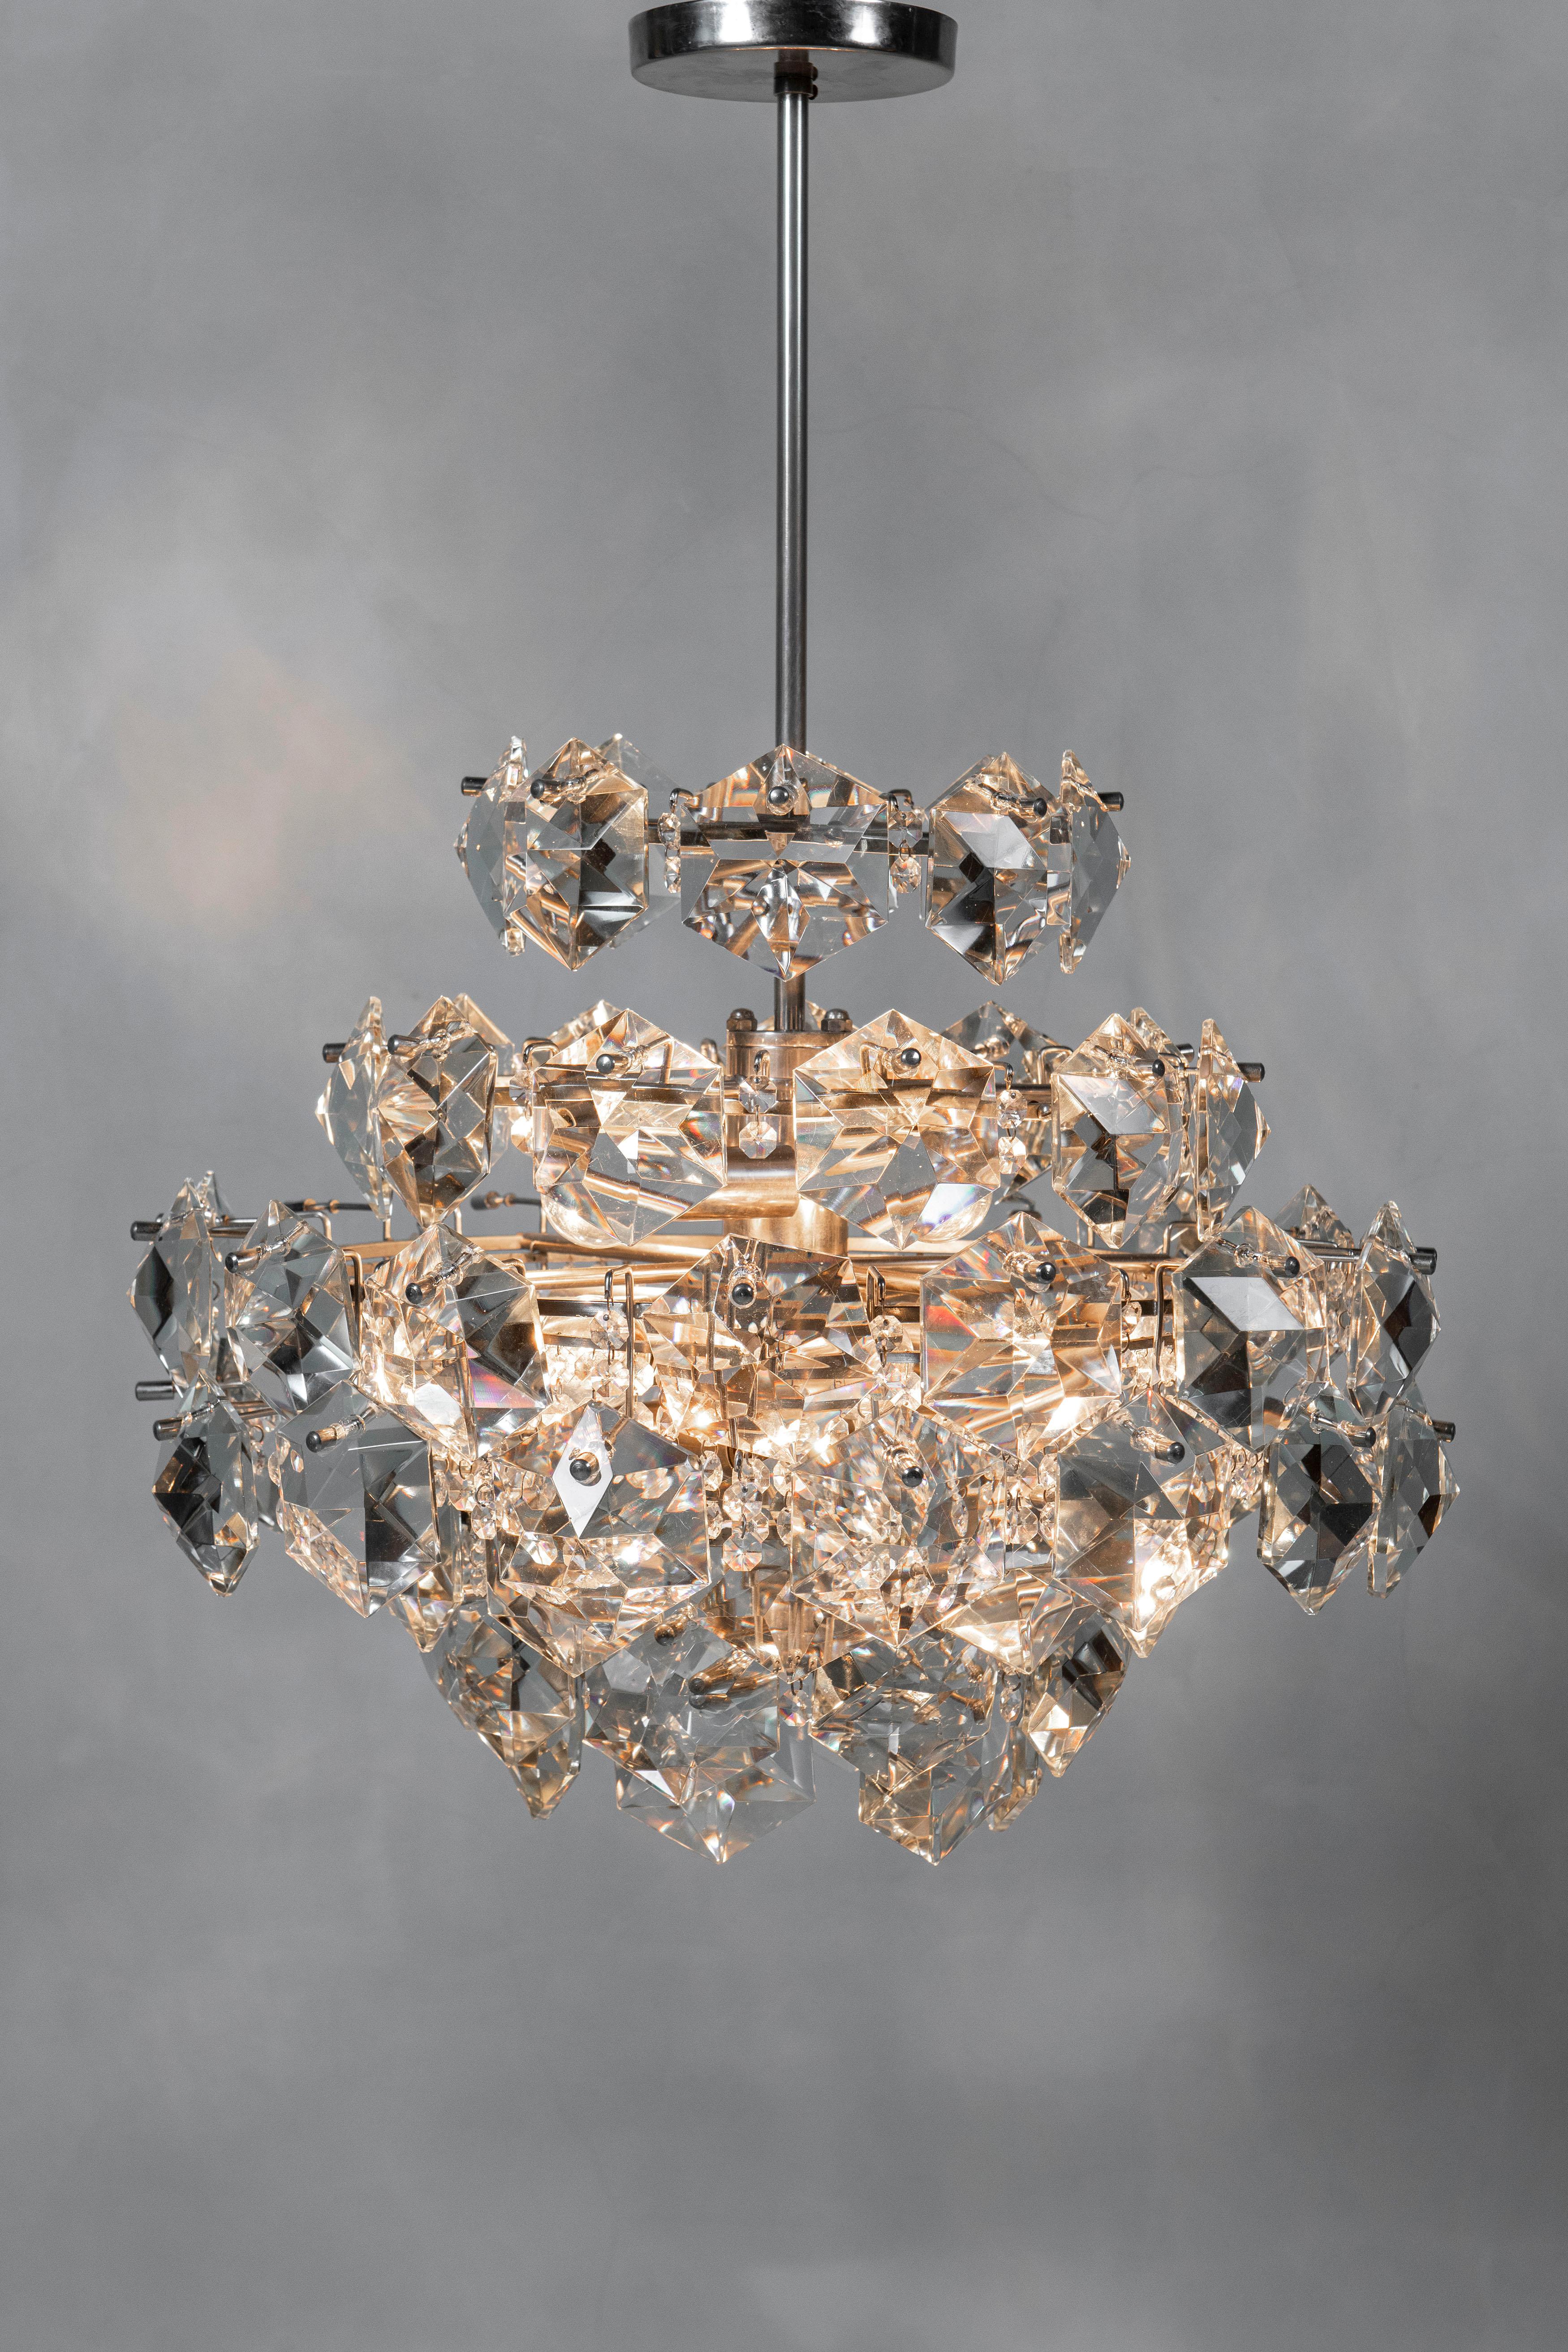 Pair of Chrome metal and crystal glass chandeliers attributed to Bakalowits & Söhne, circa 1960.